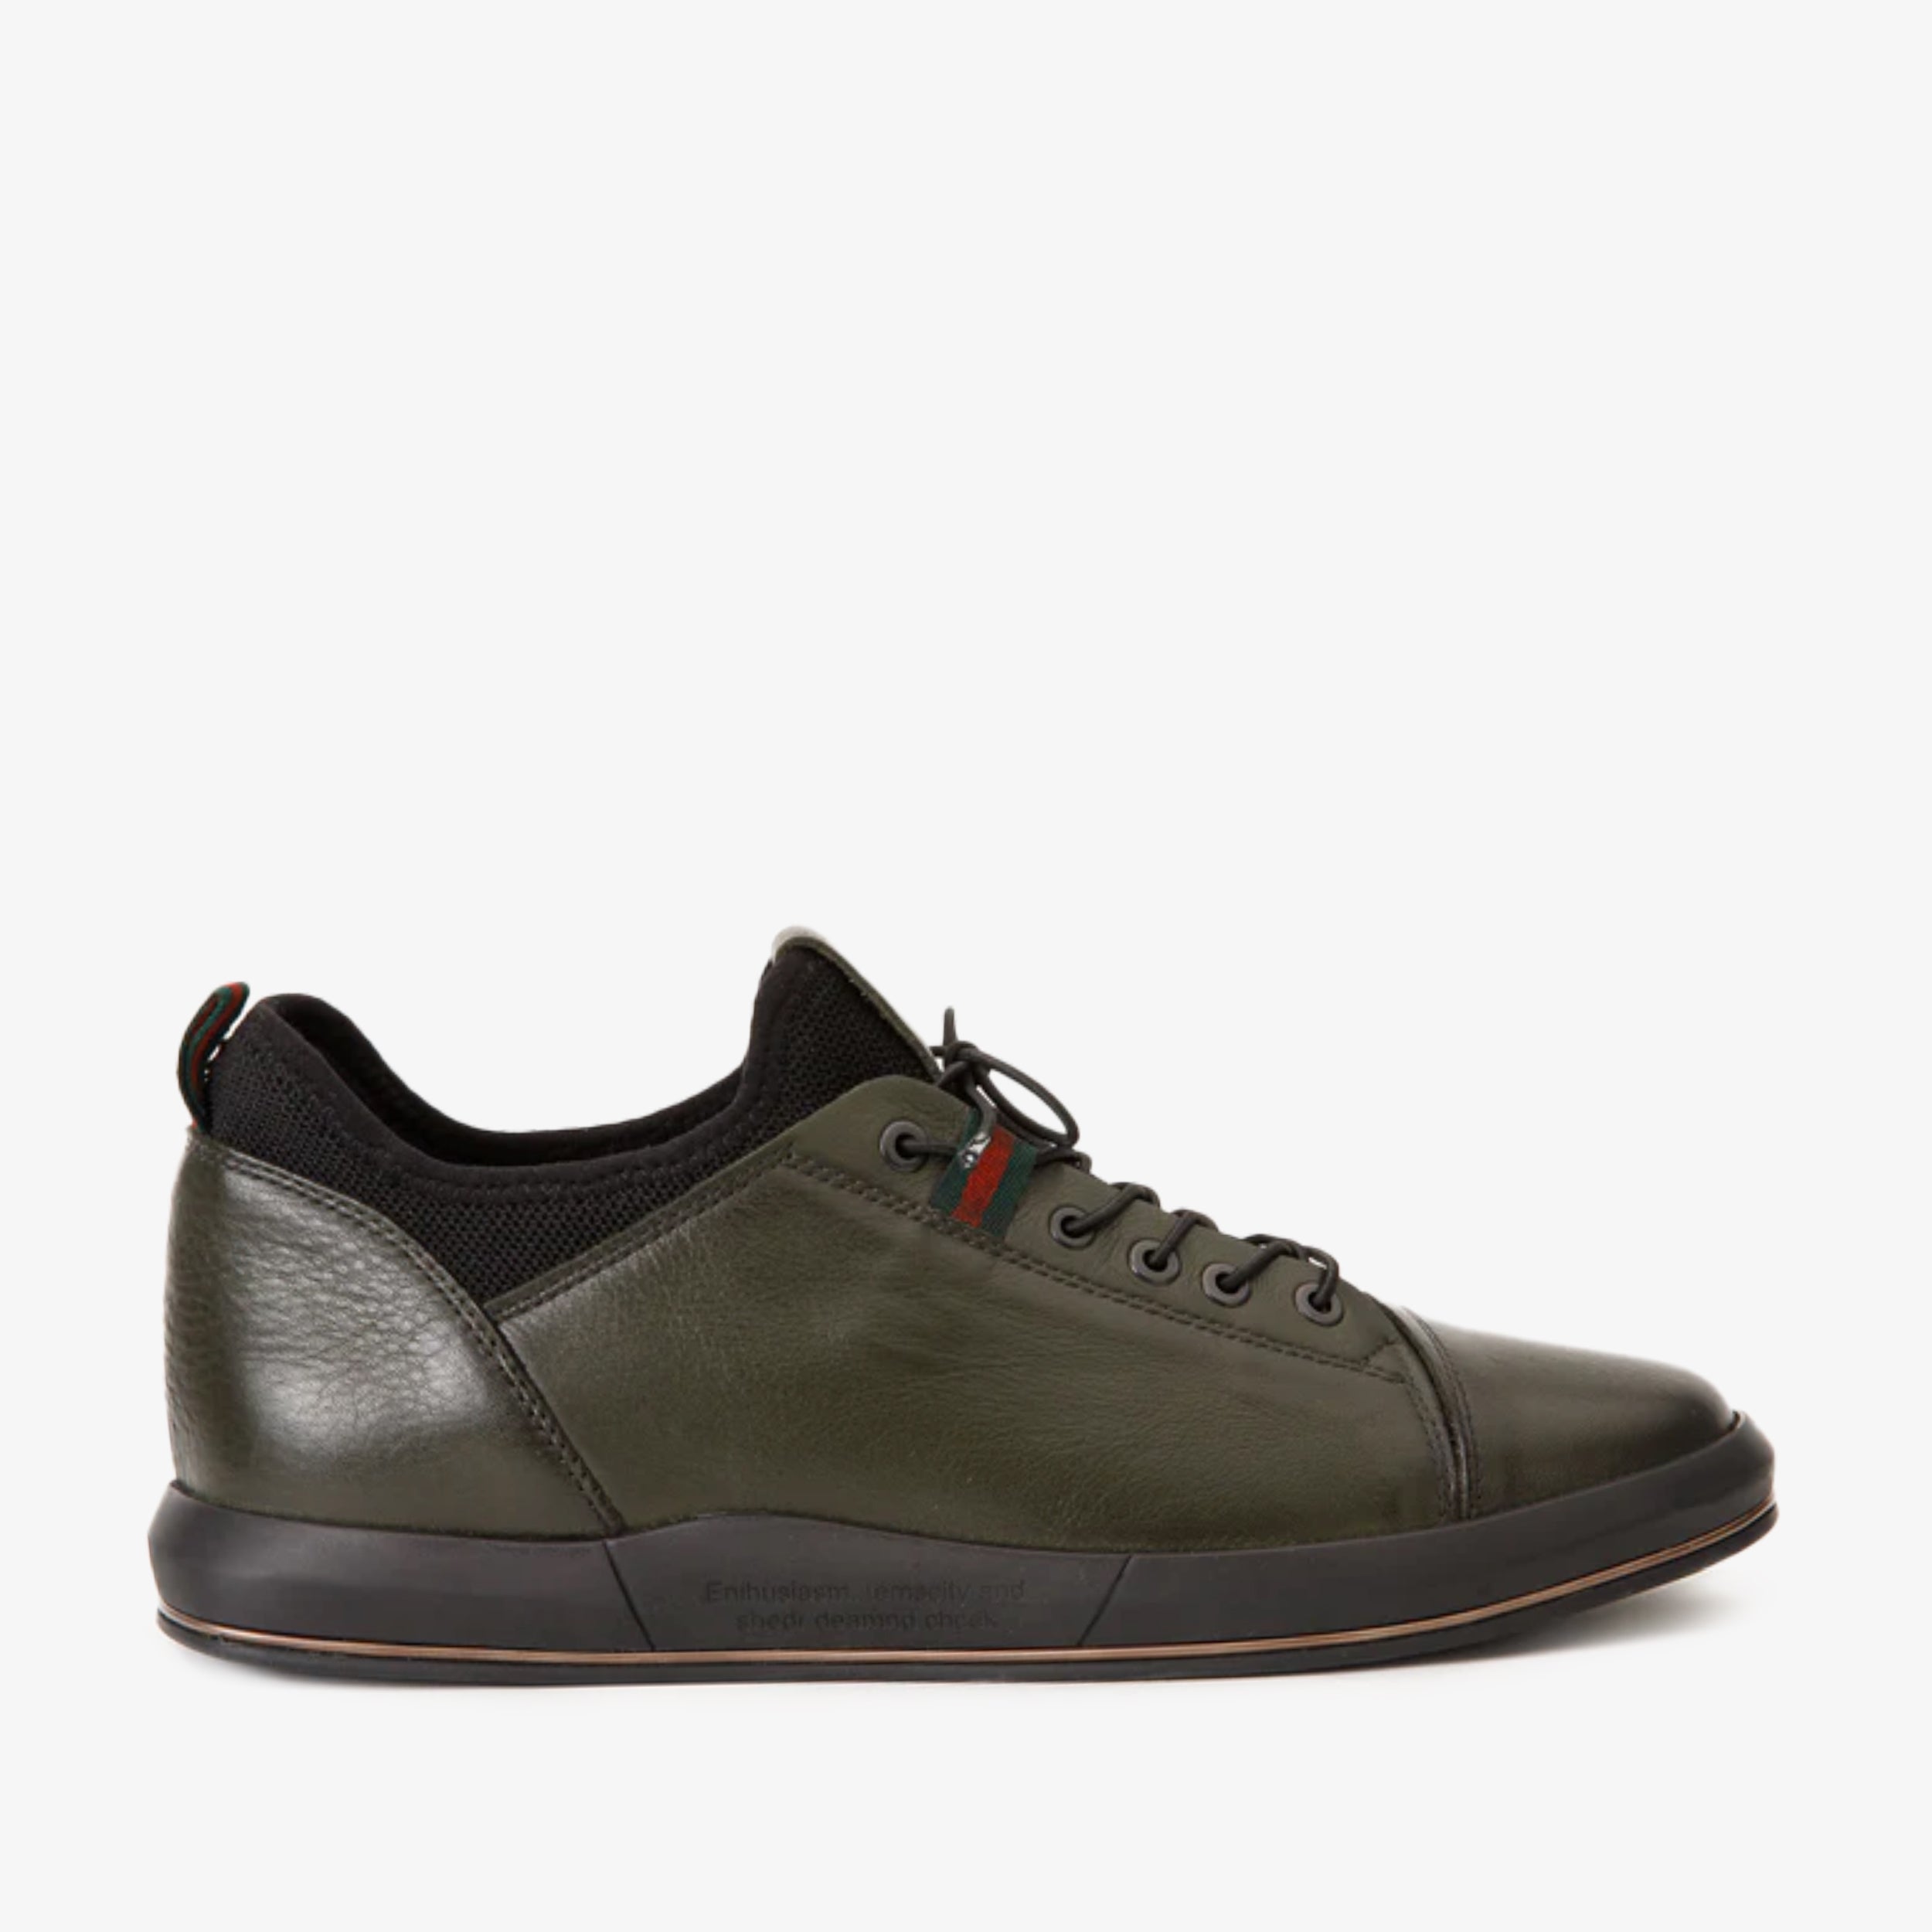 The Hoxton Green Leather Men Sneaker